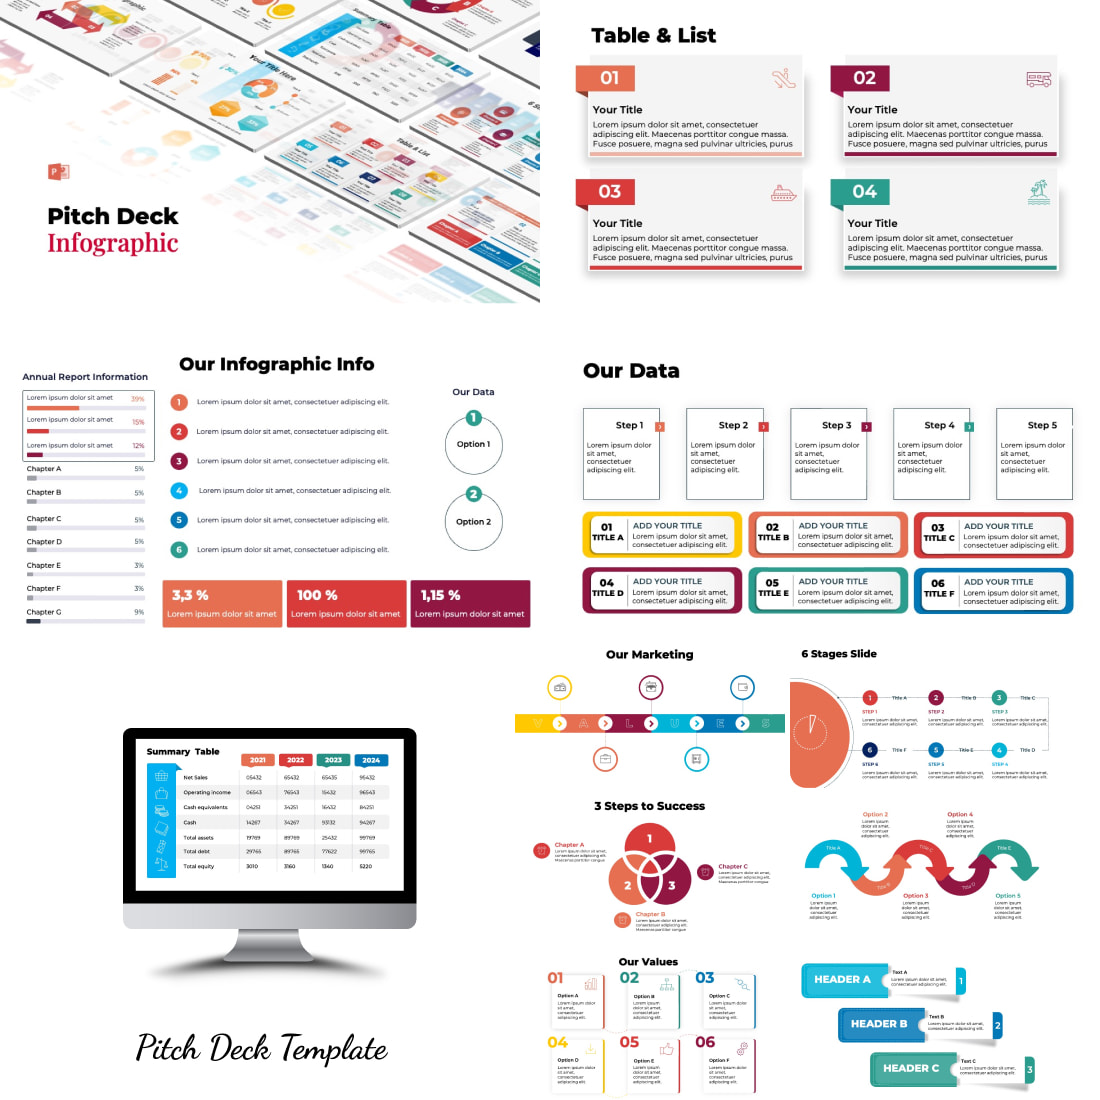 Pitch Deck Infographic Template preview image.